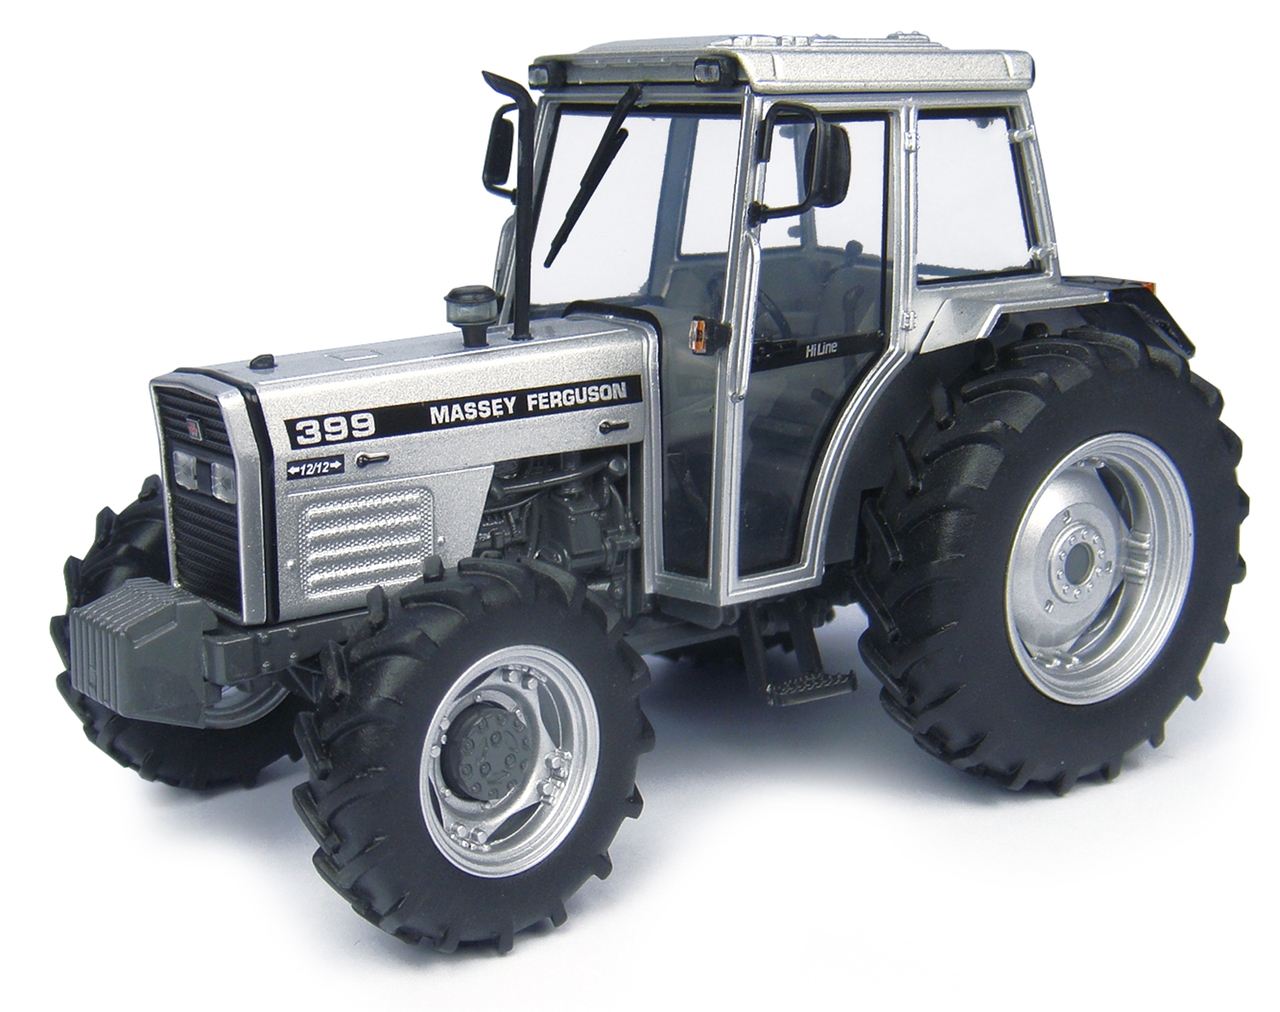 Massey Ferguson 399 Tractor Silver Edition "50th Anniversary Of Tractor Production At Coventry" Limited Edition To 1500 Pieces Worldwide 1/32 Diecast